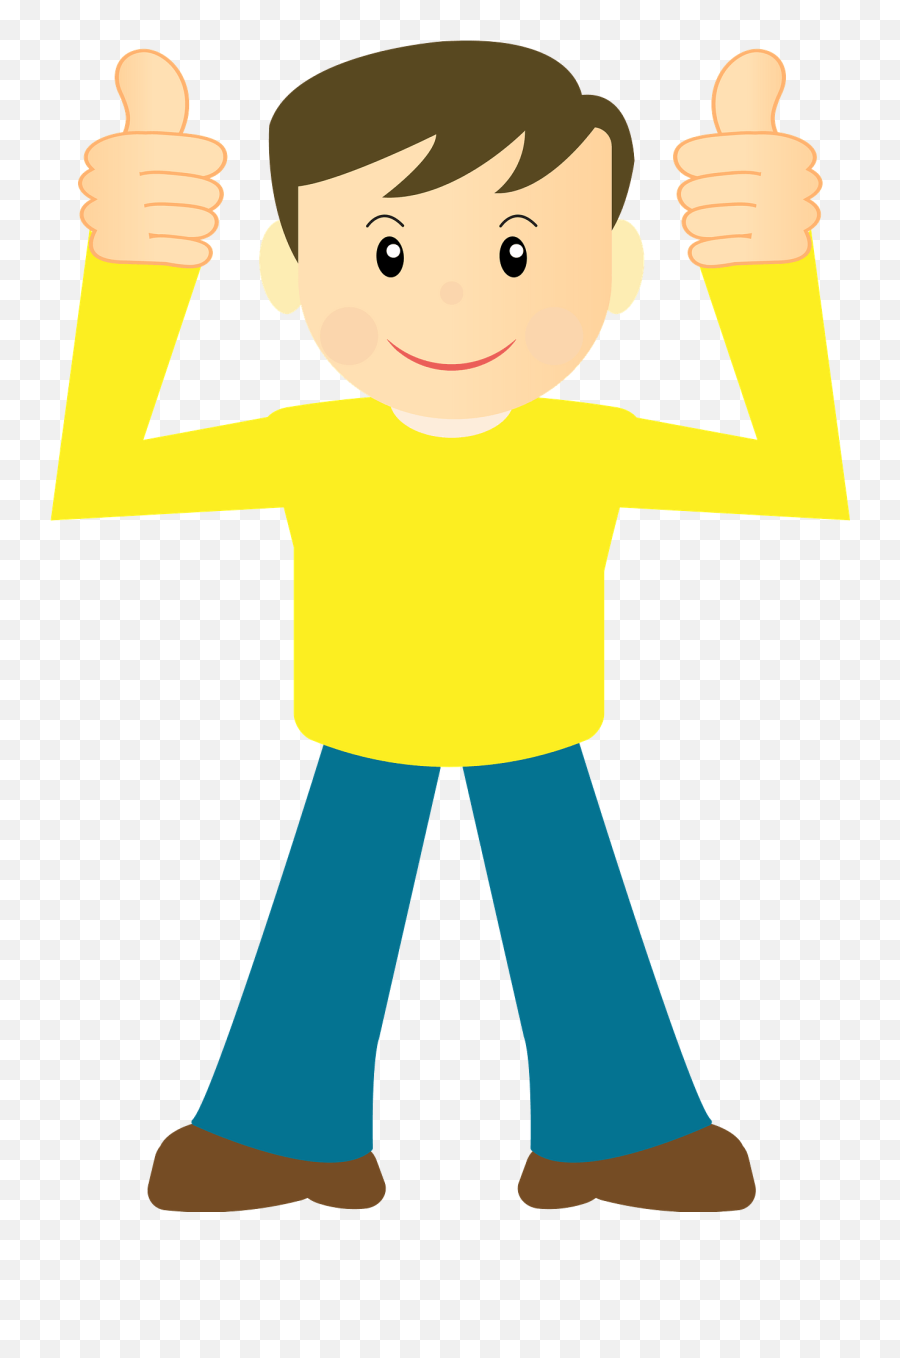 Man Is Giving Thumbs Up Clipart - Person Thumbs Up Clip Art Emoji,Thumbs Up Guy With Glasses Emoji